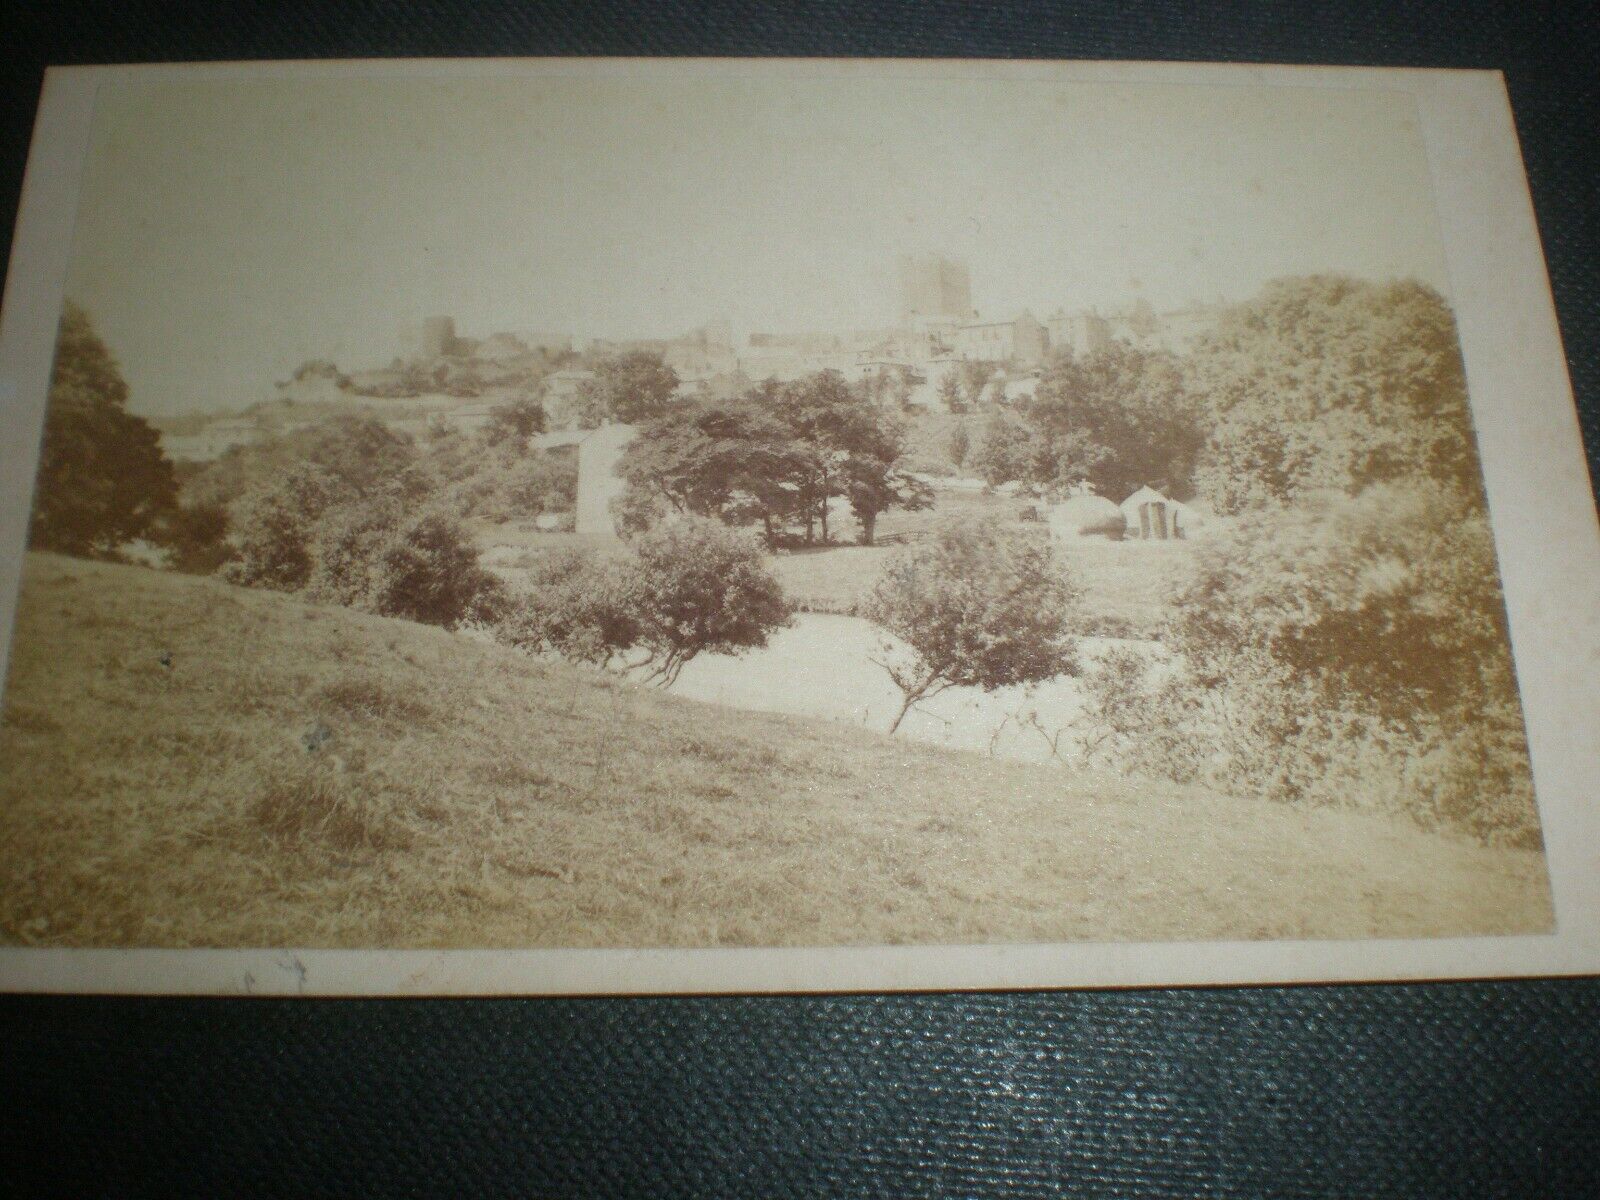 Cdv old photograph view 1 of Richmond Yorkshire by J Raine c1860s